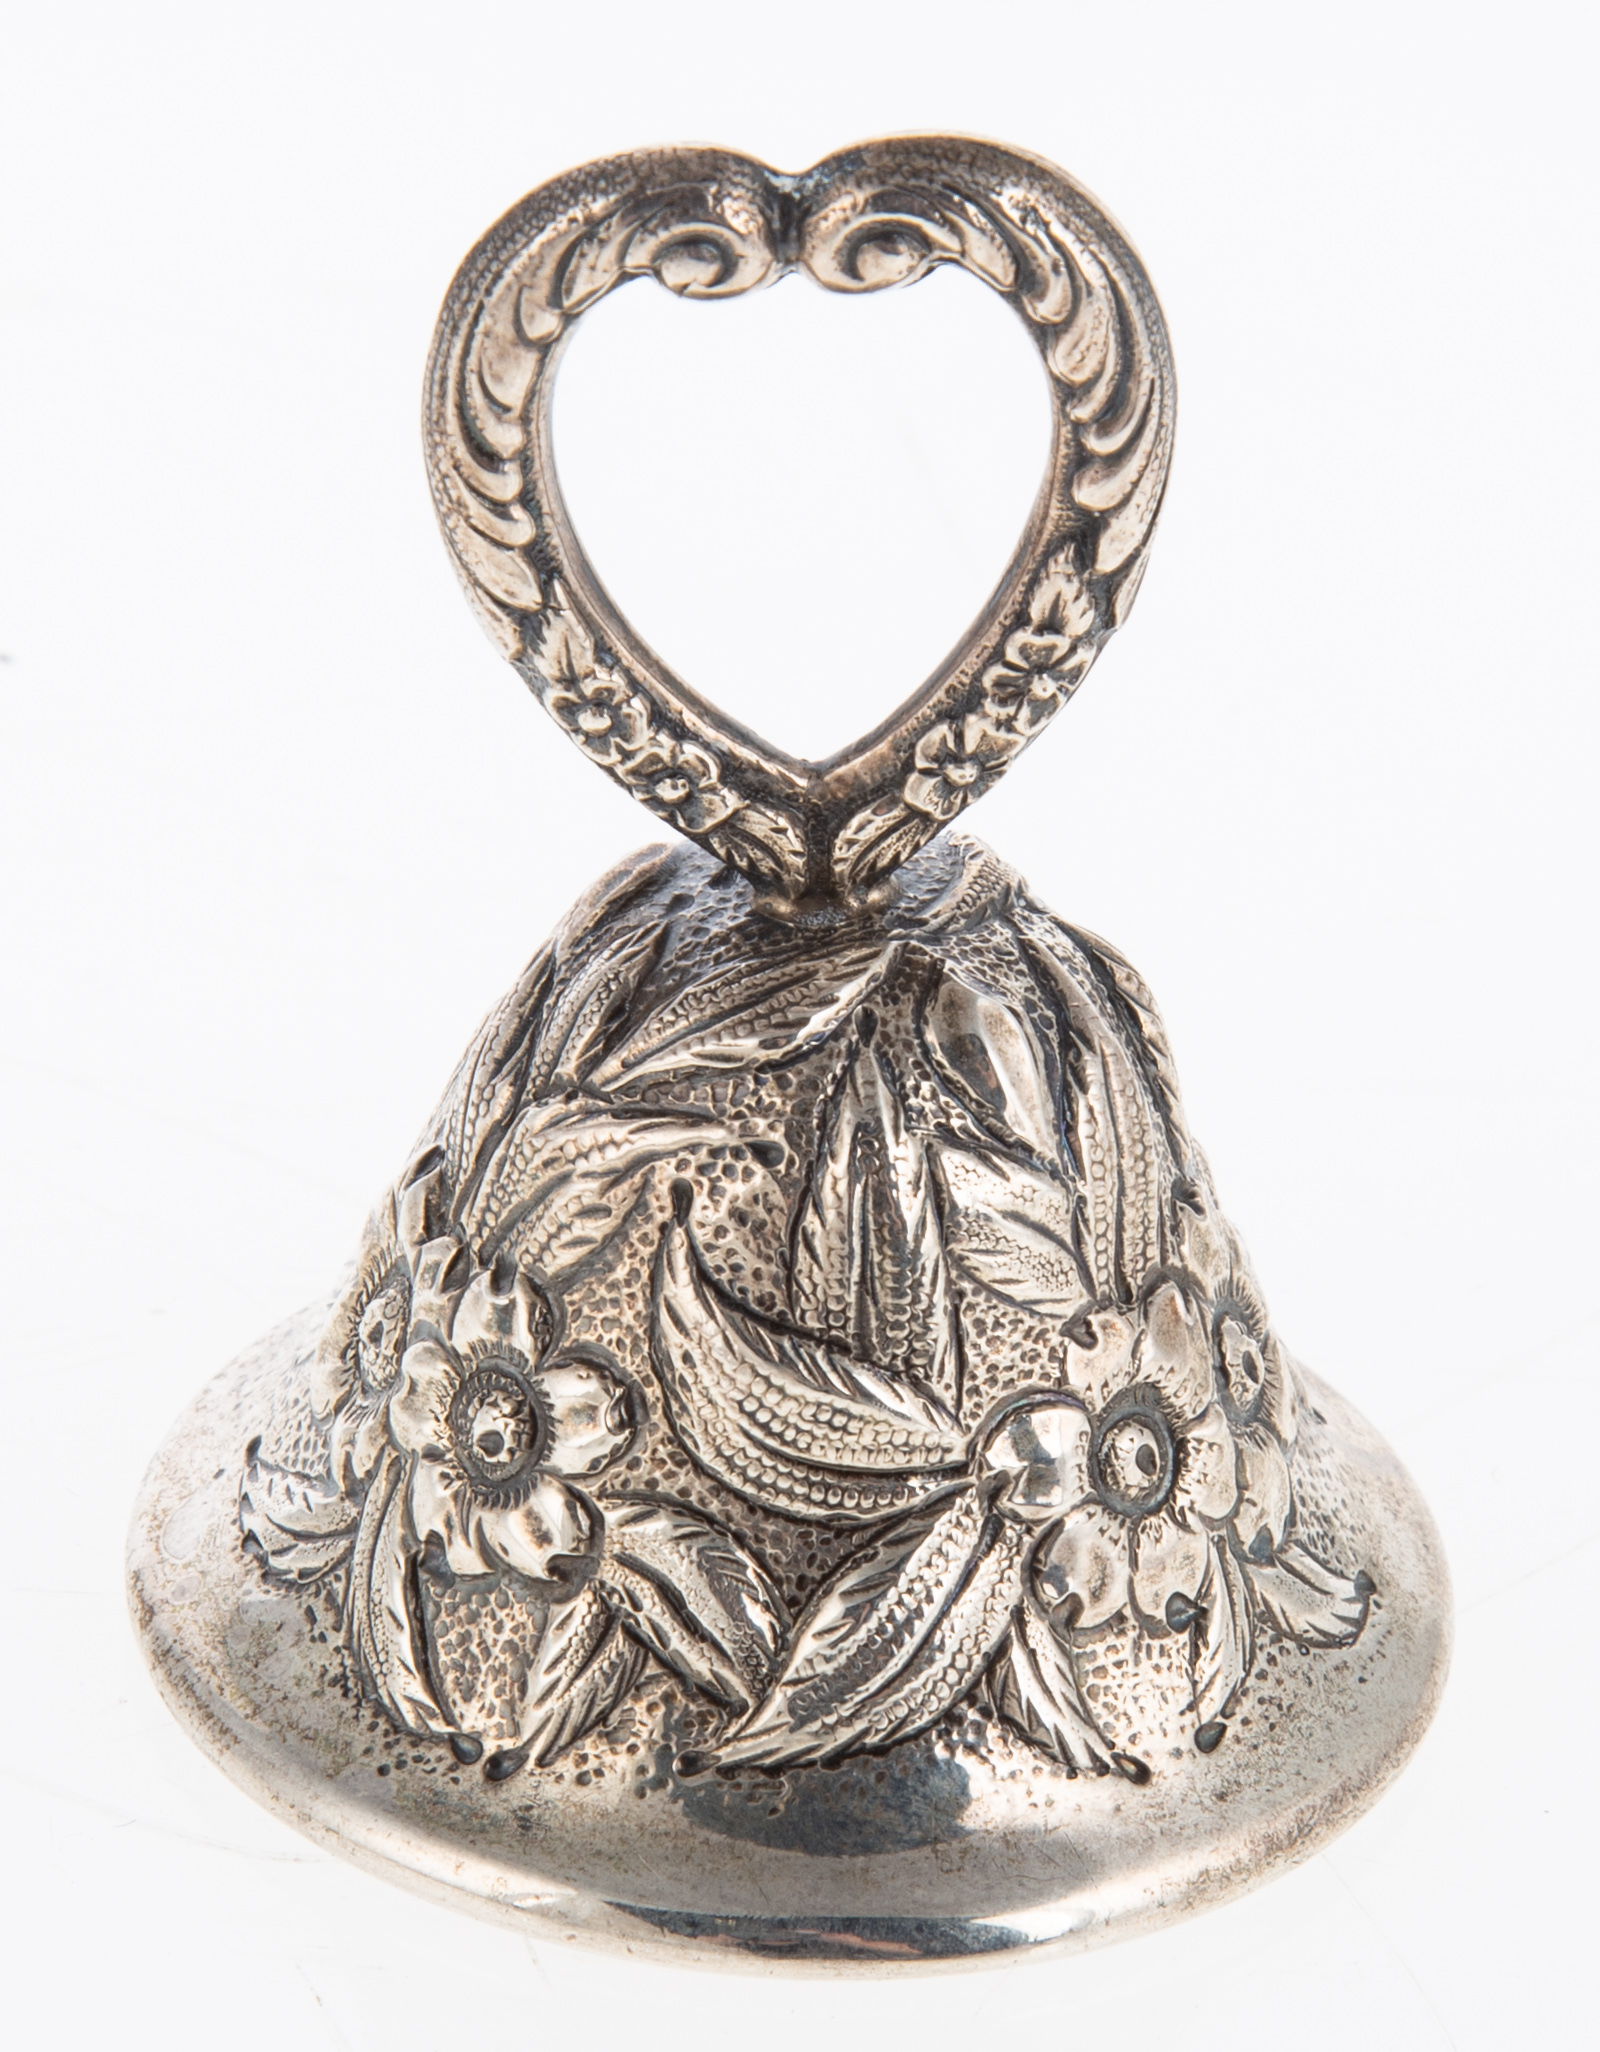 S KIRK & SON REPOUSSE STERLING SILVER